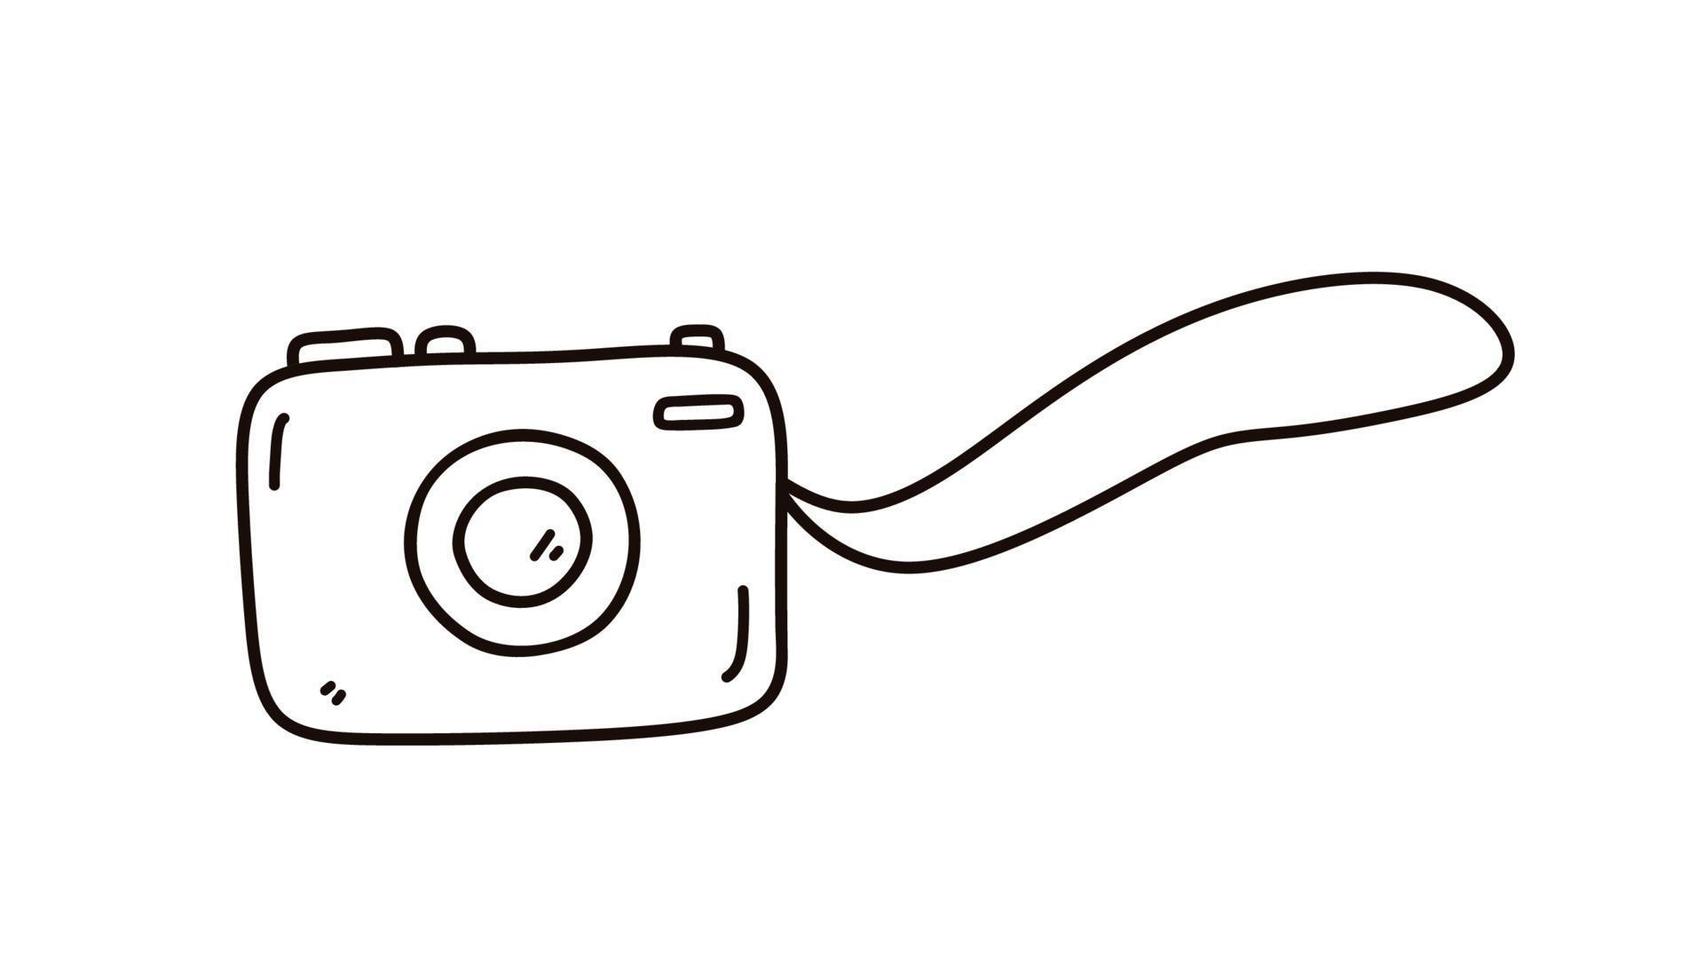 Photo camera isolated on white background. Vector hand-drawn illustration in doodle style. Perfect for cards, logo, decorations, various designs.